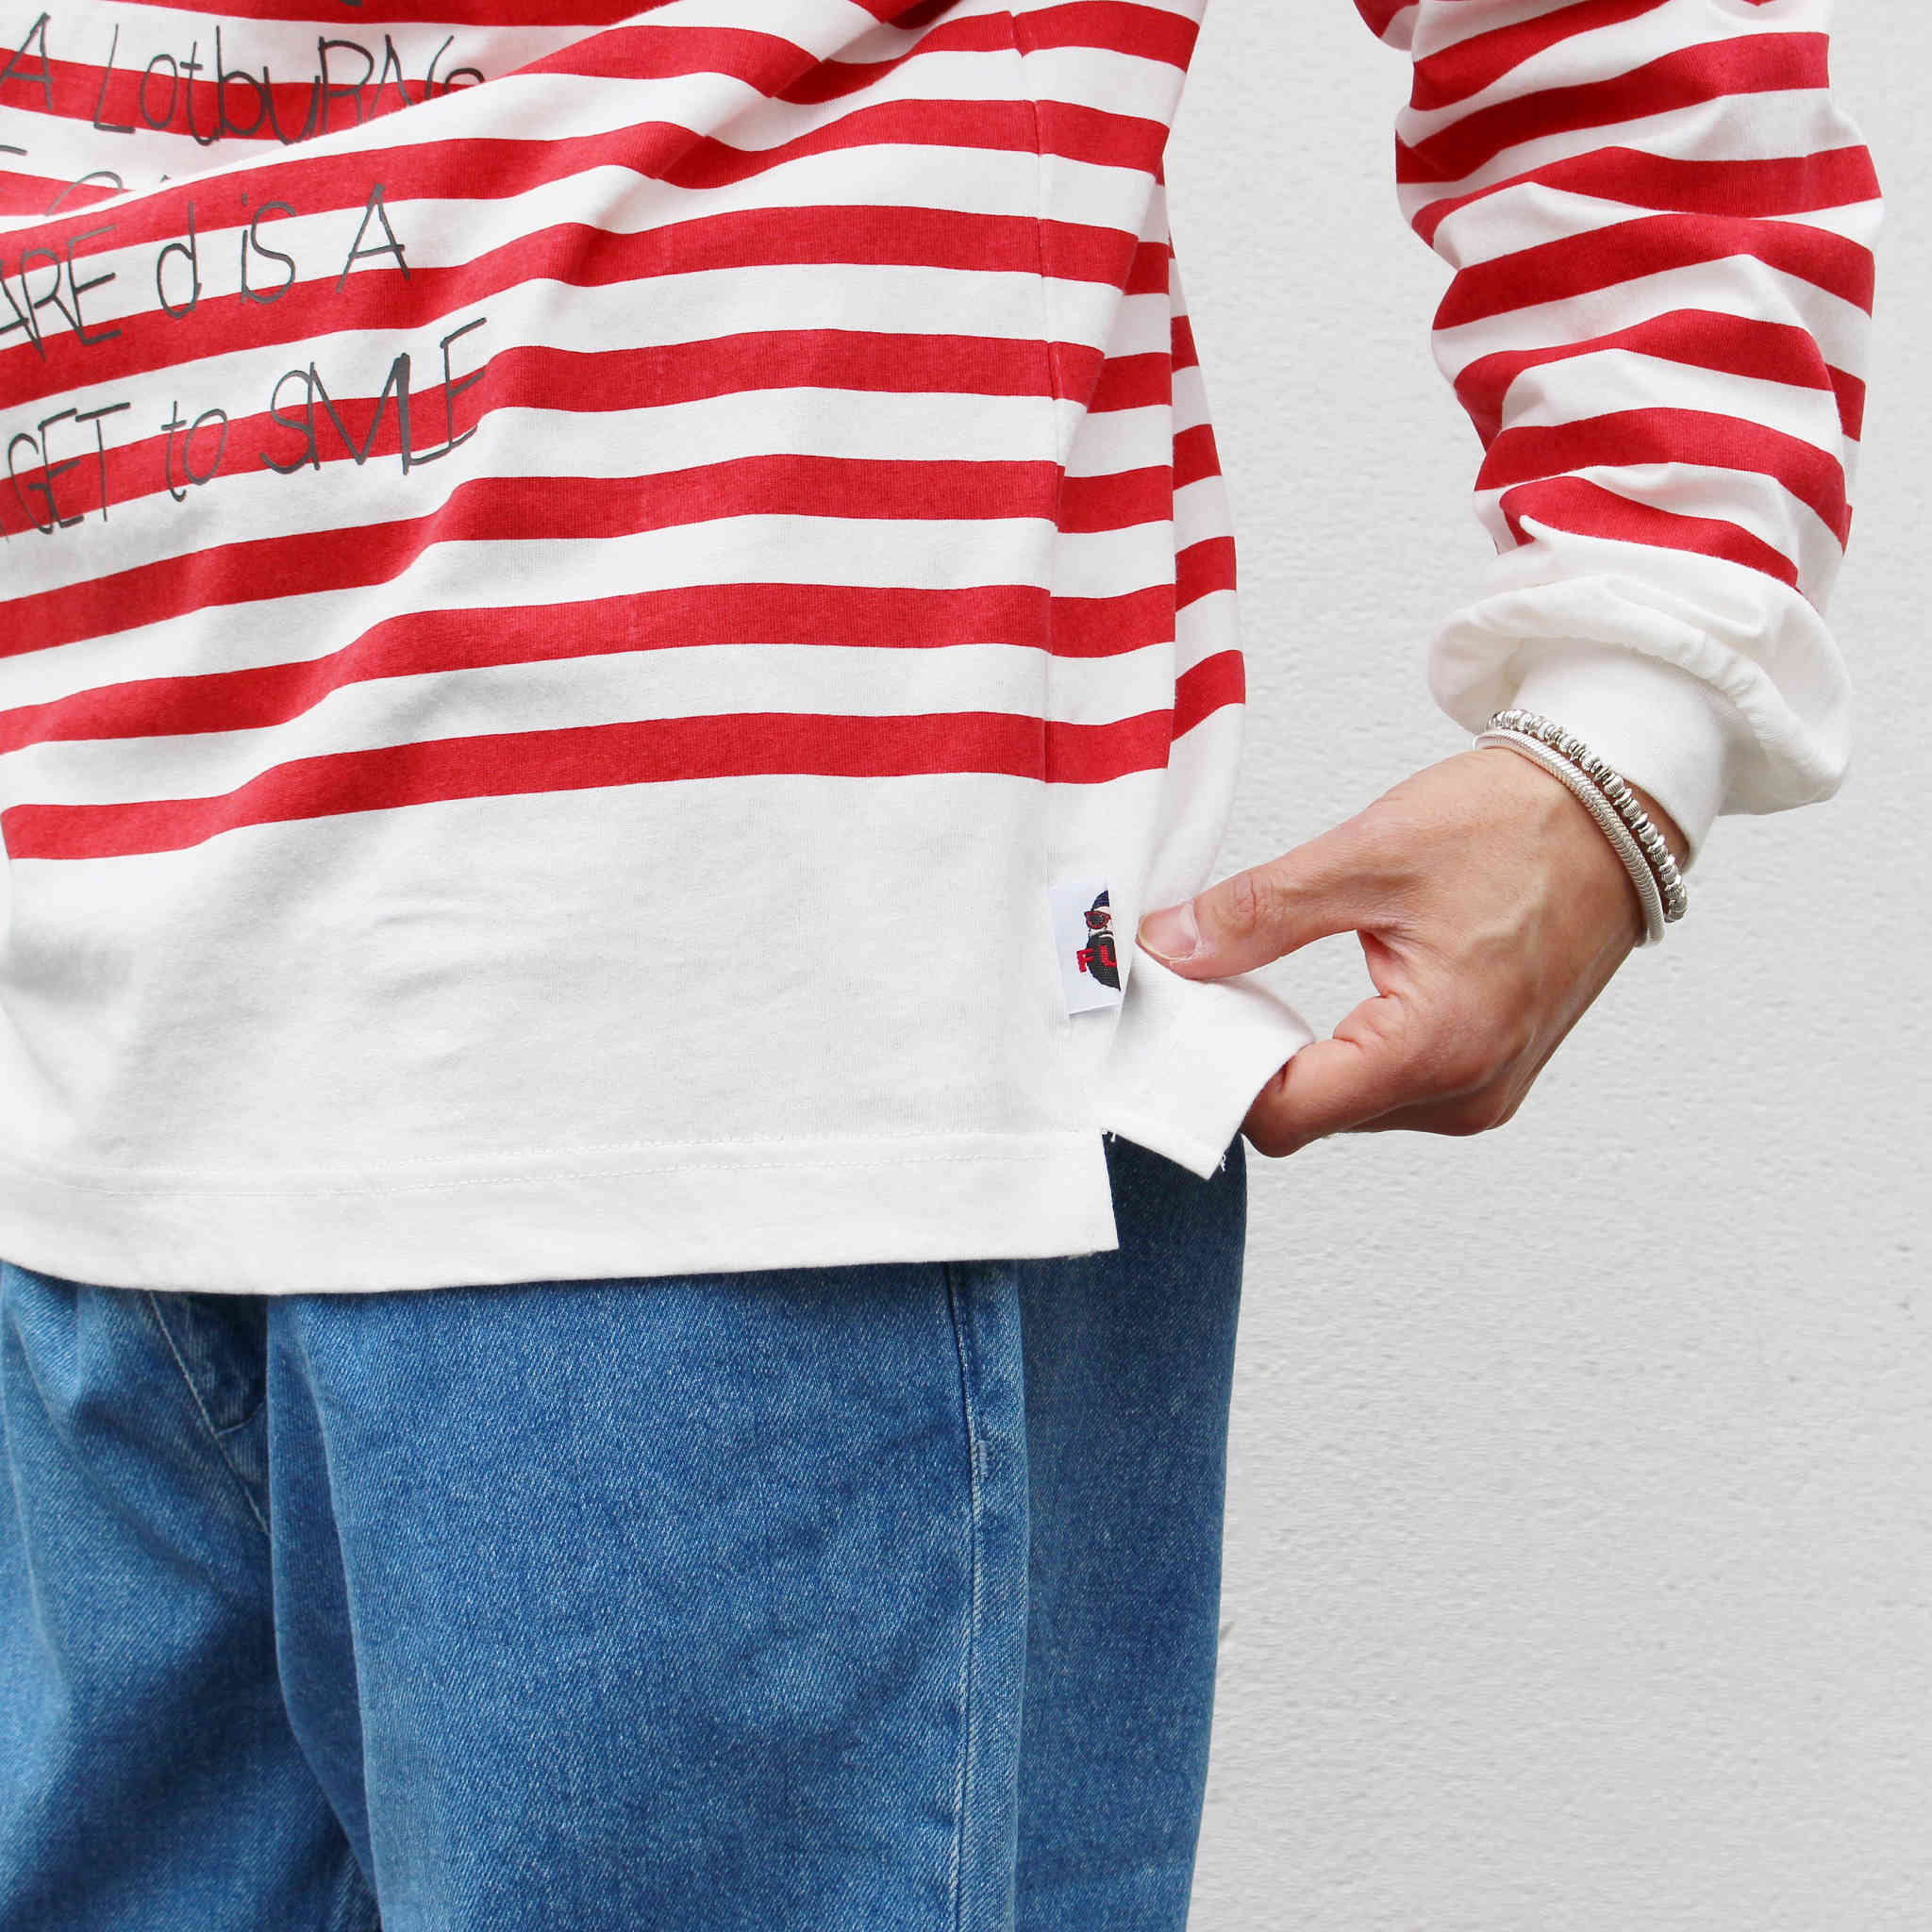 FUN for modemdesign モデムデザイン / Border print long sleeve Tee ボーダープリントロングスリーブティー (WHITE×RED ホワイトレッド)